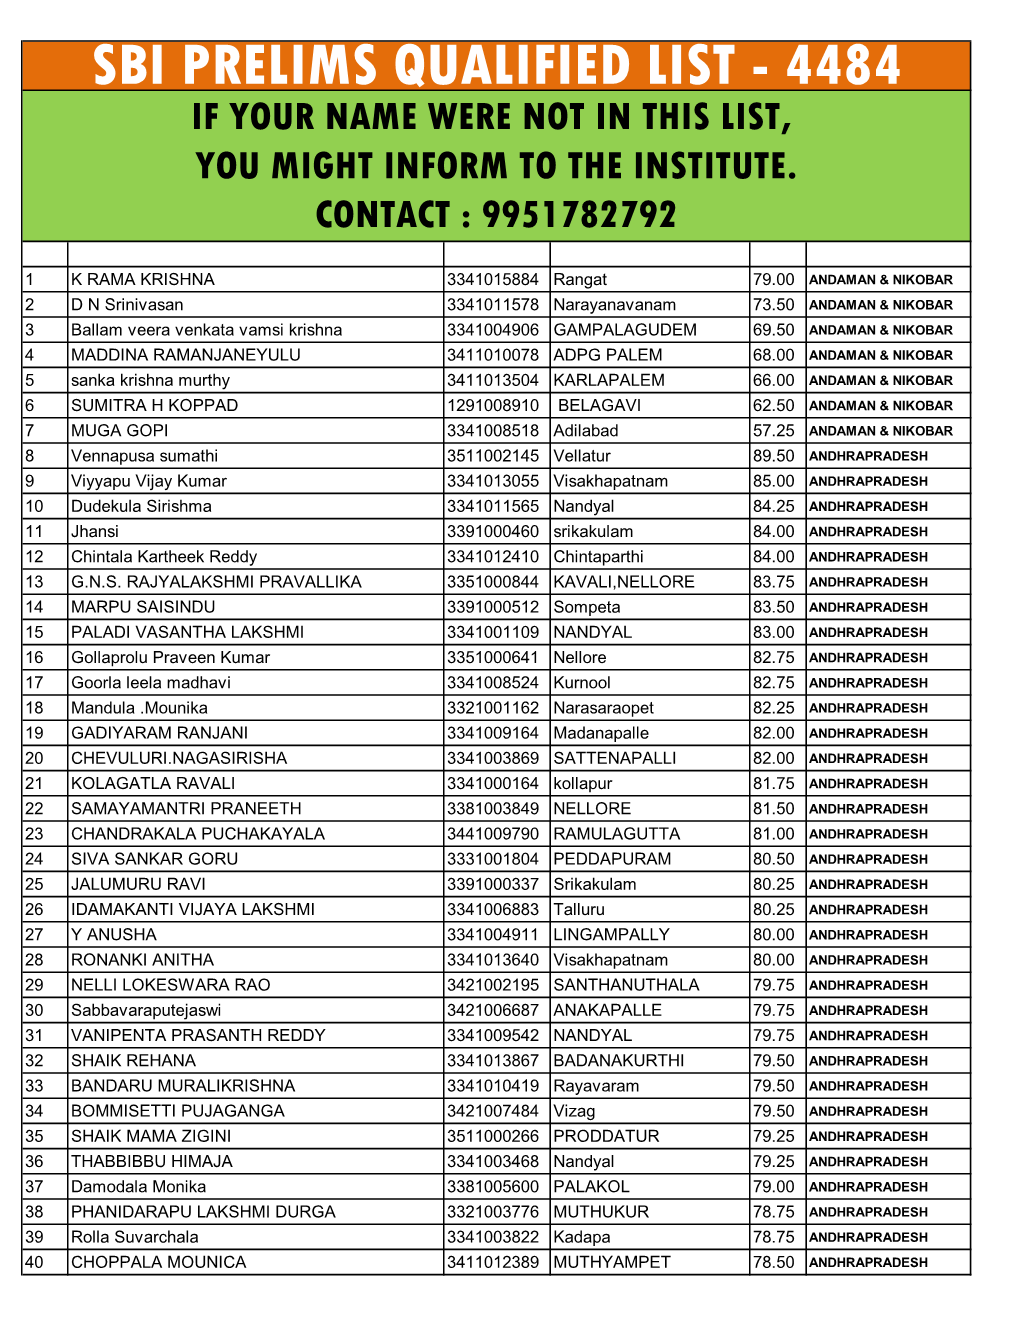 Sbi Prelims Qualified List - 4484 If Your Name Were Not in This List, You Might Inform to the Institute